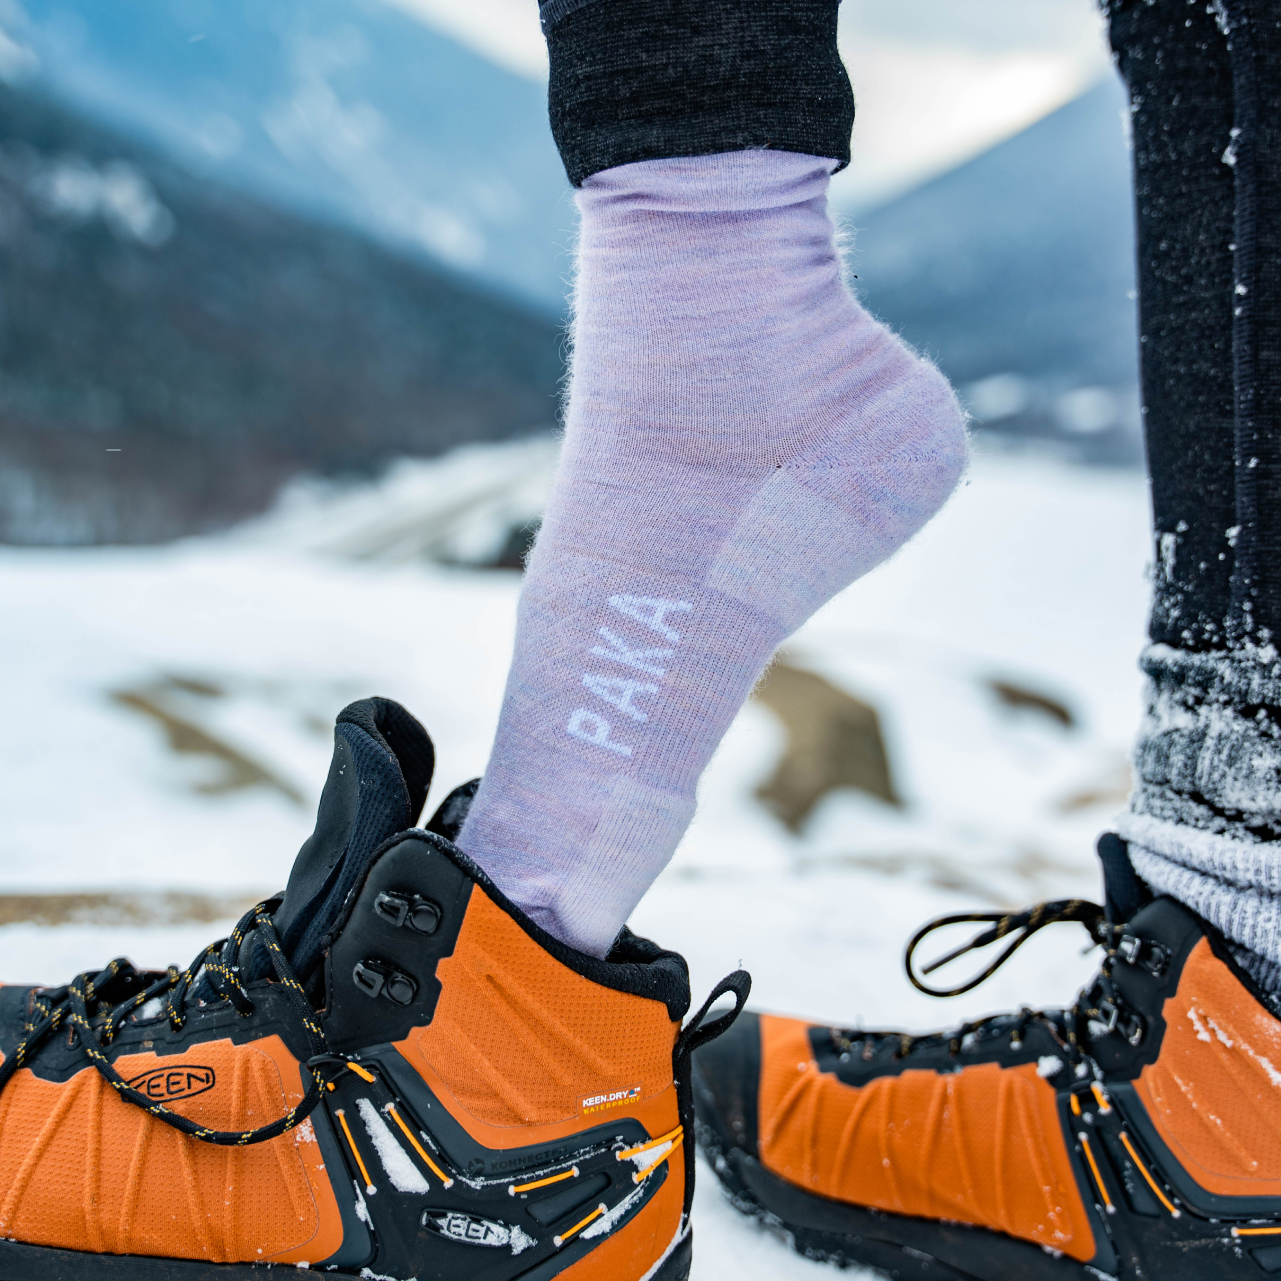 Someone putting on their shoes wearing our lavender alpaca socks in a snowy place